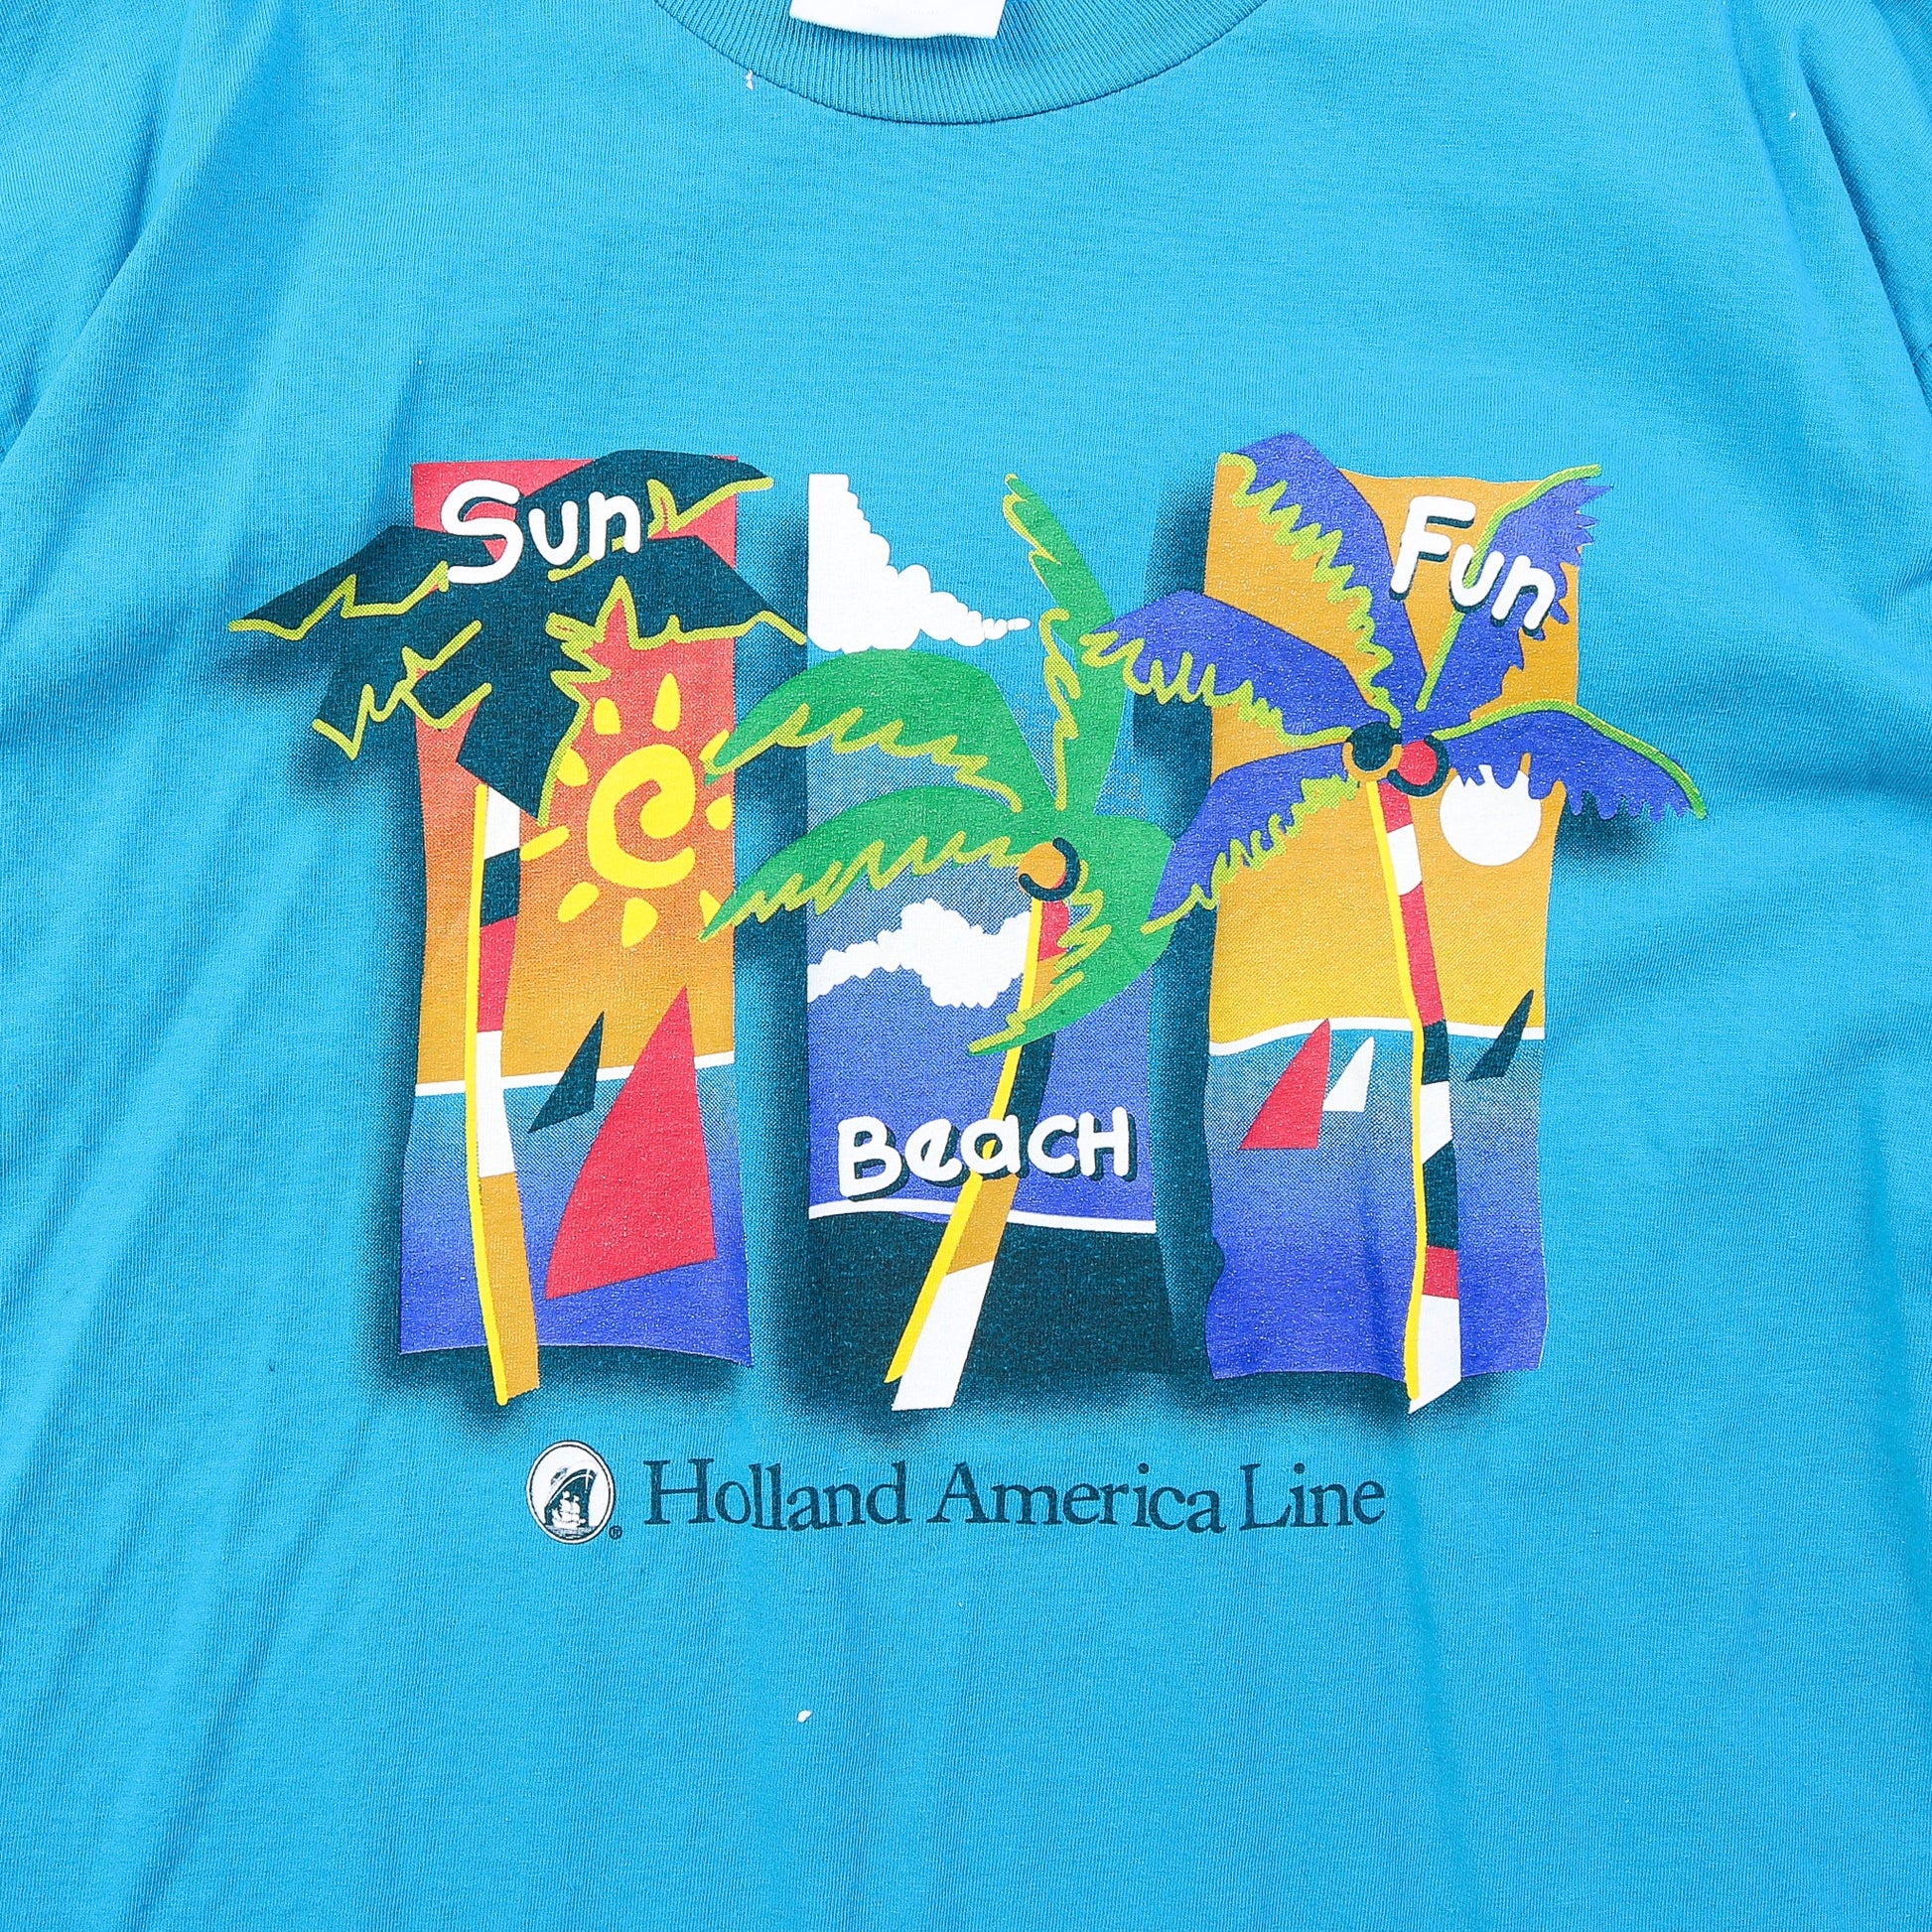 Vintage "Holland America Line" T-Shirt - American Madness